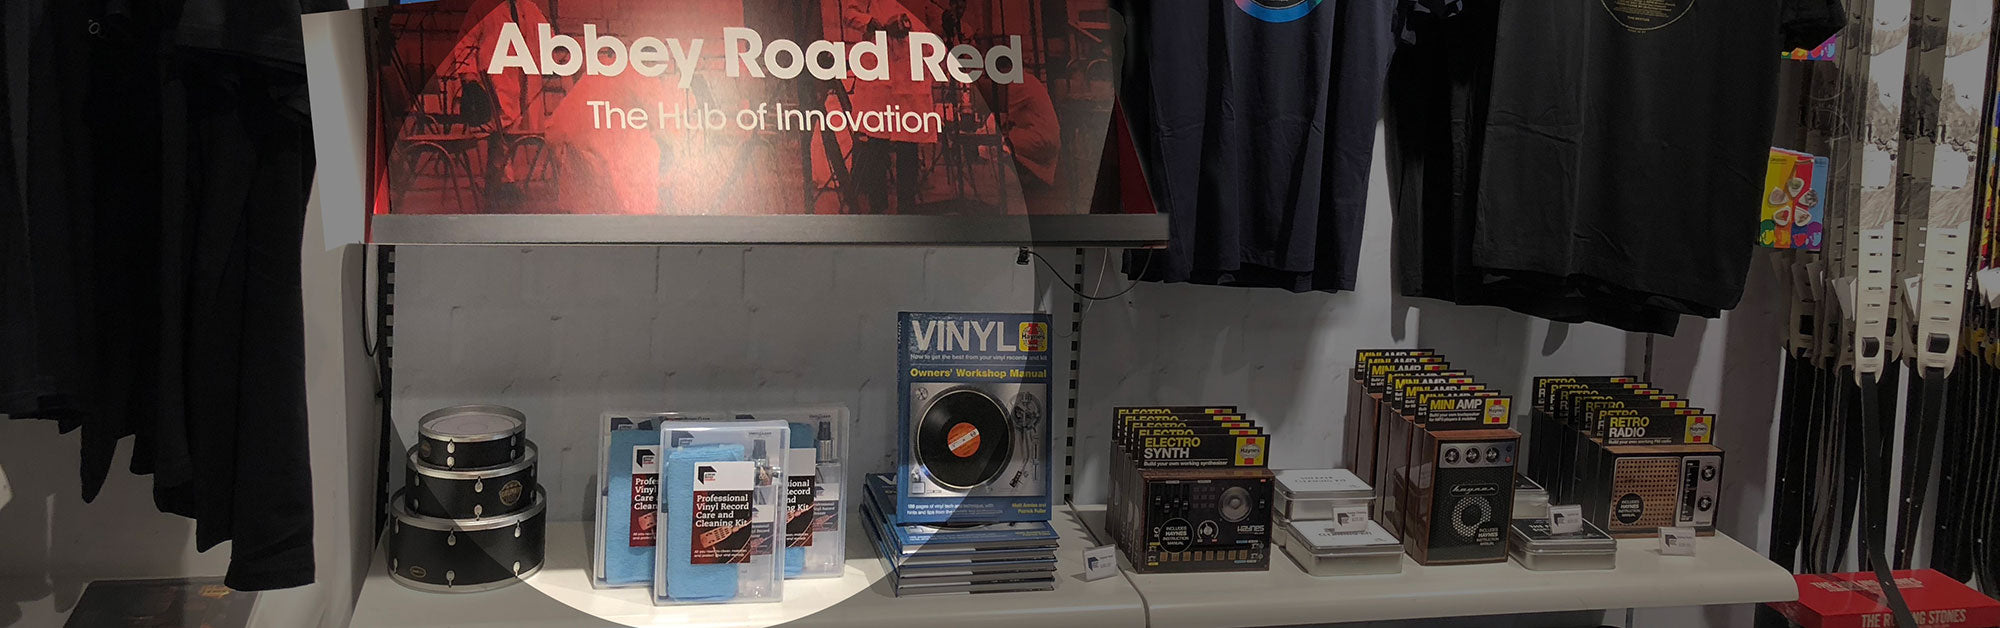 Vinyl Record Cleaning Gifts: The Perfect Choice for DJs, Music Lovers, and Northern Soul Aficionados